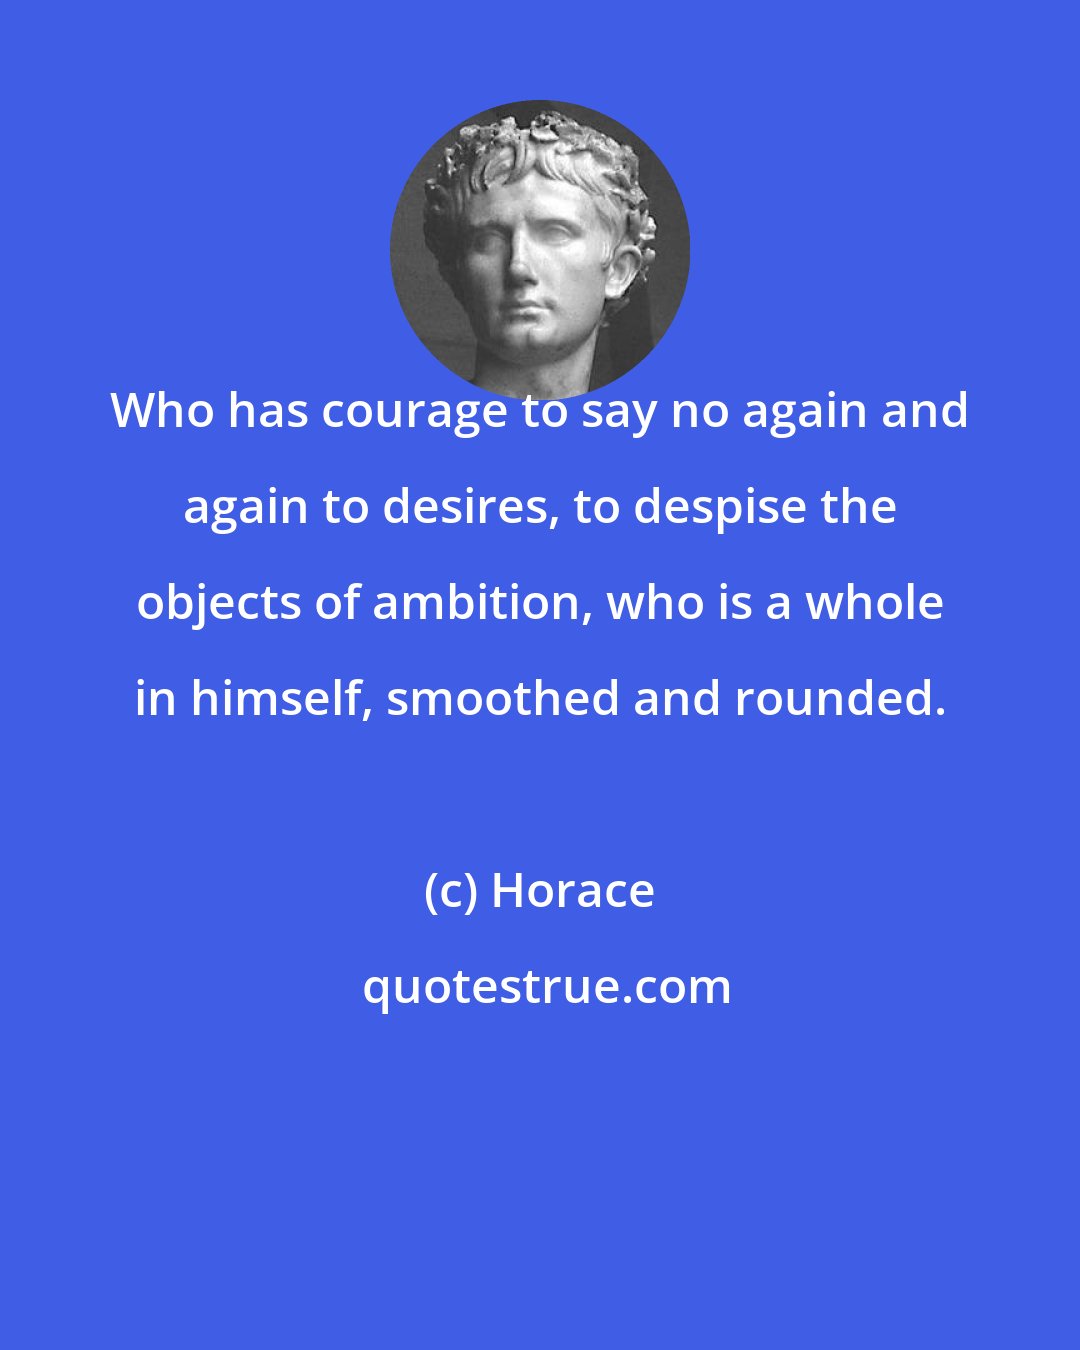 Horace: Who has courage to say no again and again to desires, to despise the objects of ambition, who is a whole in himself, smoothed and rounded.